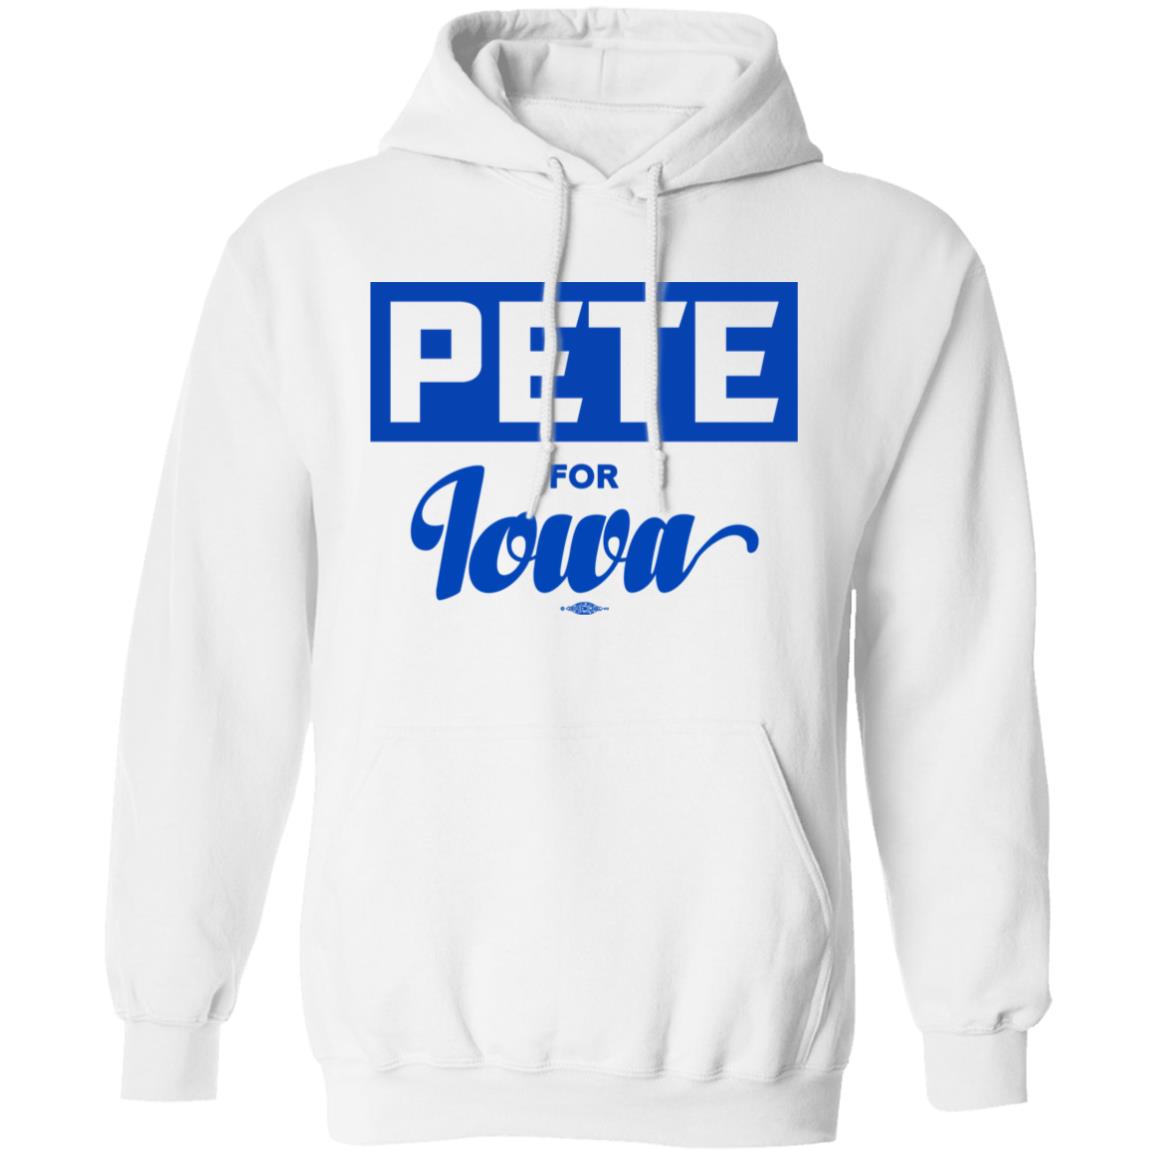 Pete For Iowa Shirt Panetory – Graphic Design Apparel &Amp; Accessories Online